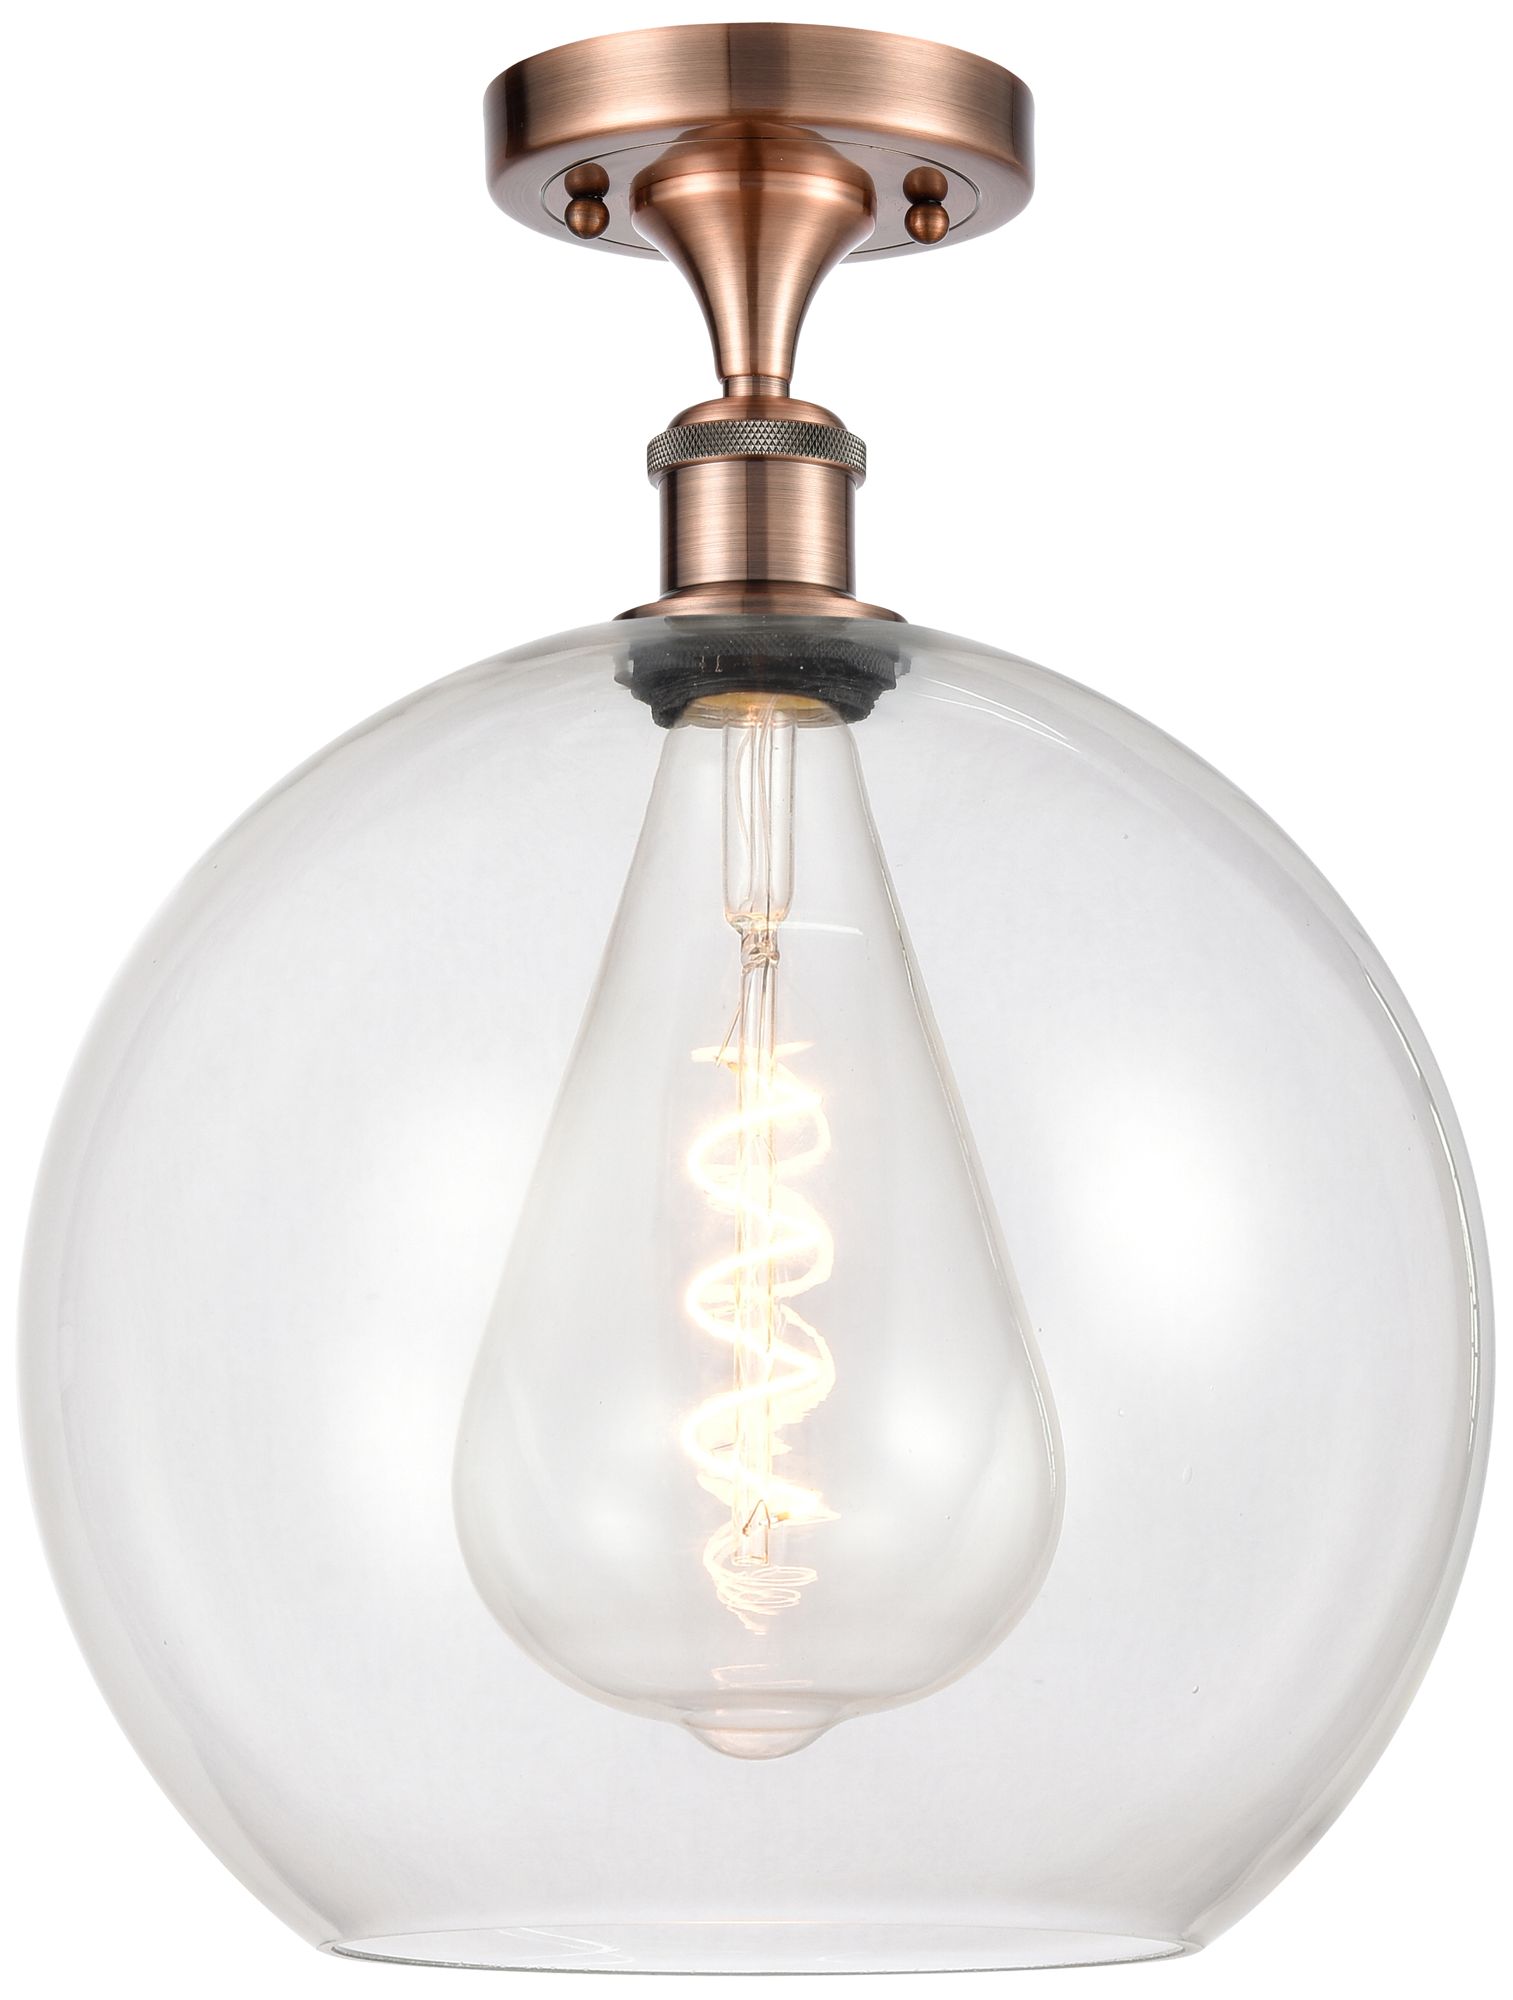 Athens  12" LED Semi-Flush Mount - Antique Copper - Clear Shade